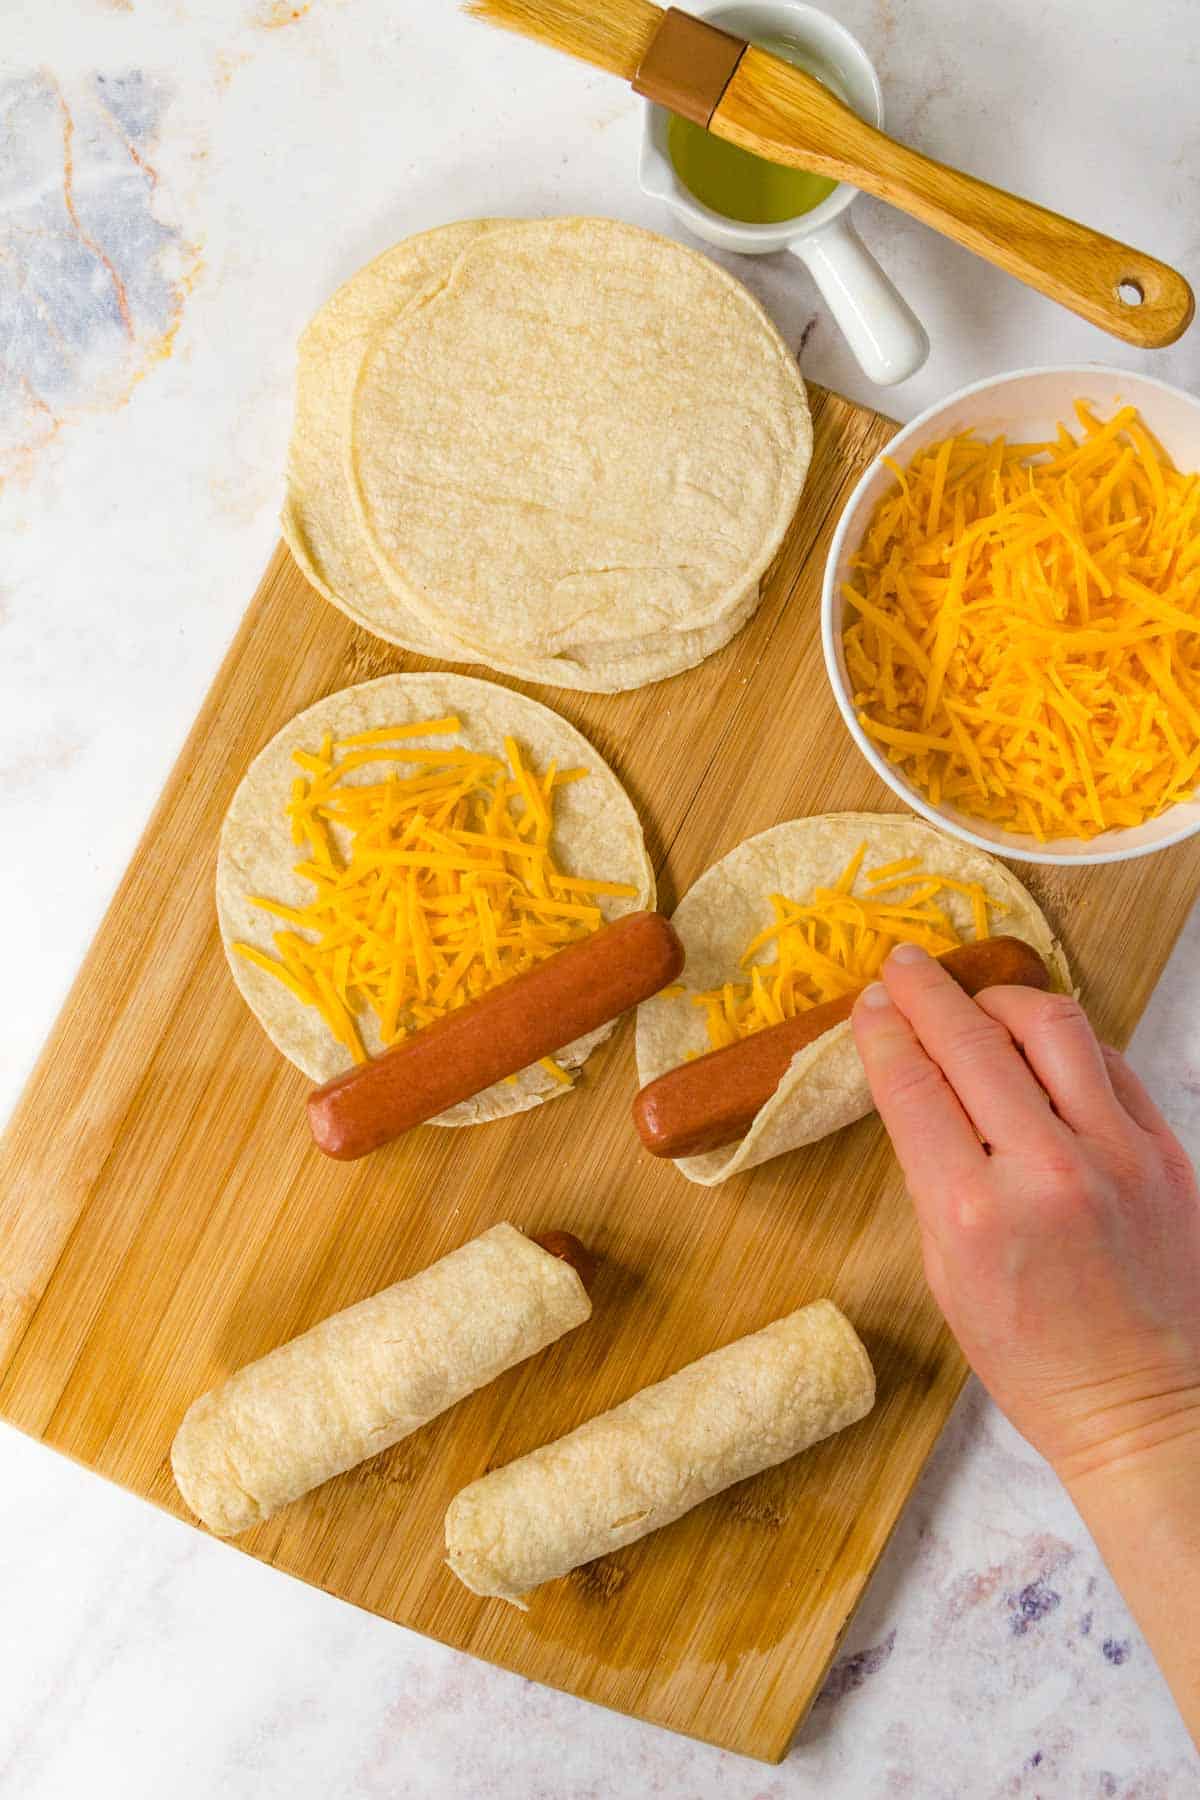 Hot dogs being rolled up in corn tortillas with shredded cheddar cheese on a wooden cutting board.